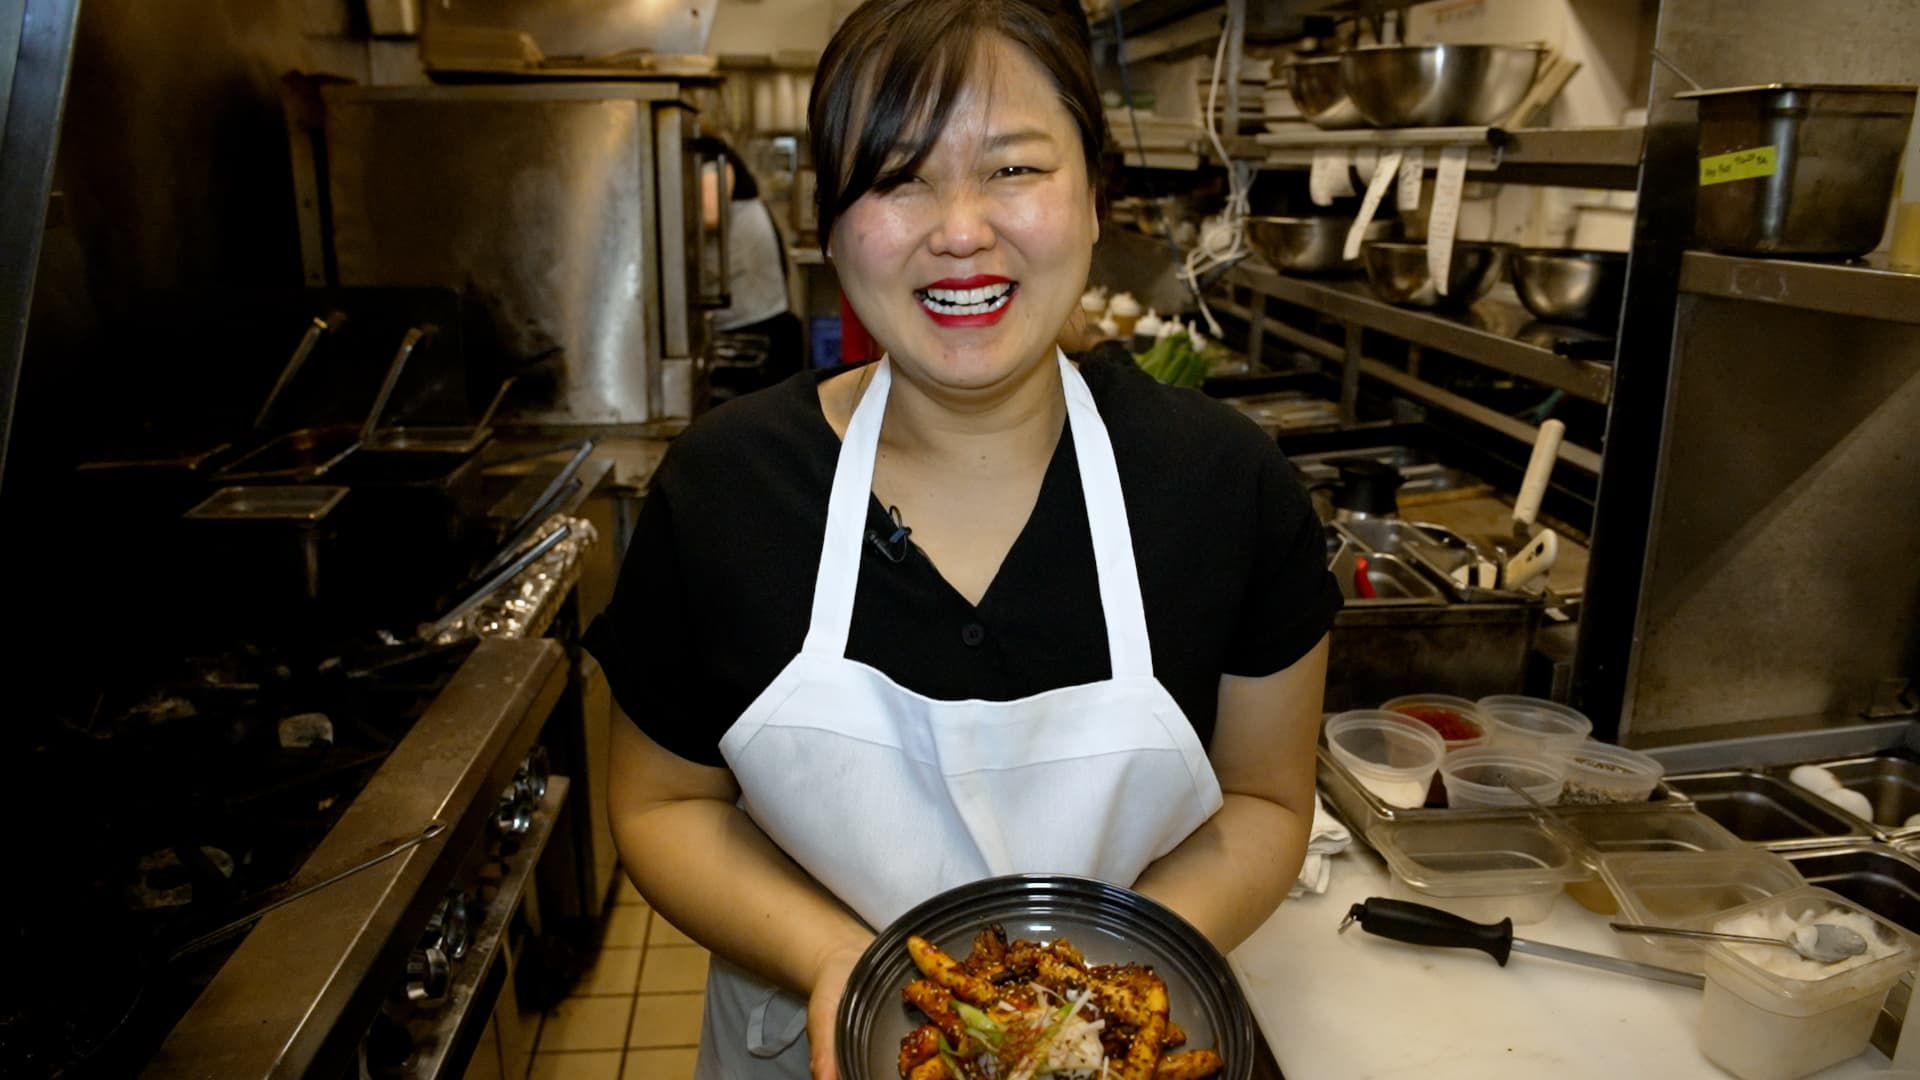 I took a nearly $90,000 pay cut to work in food—now my restaurant brings in more than $1.8 million per year